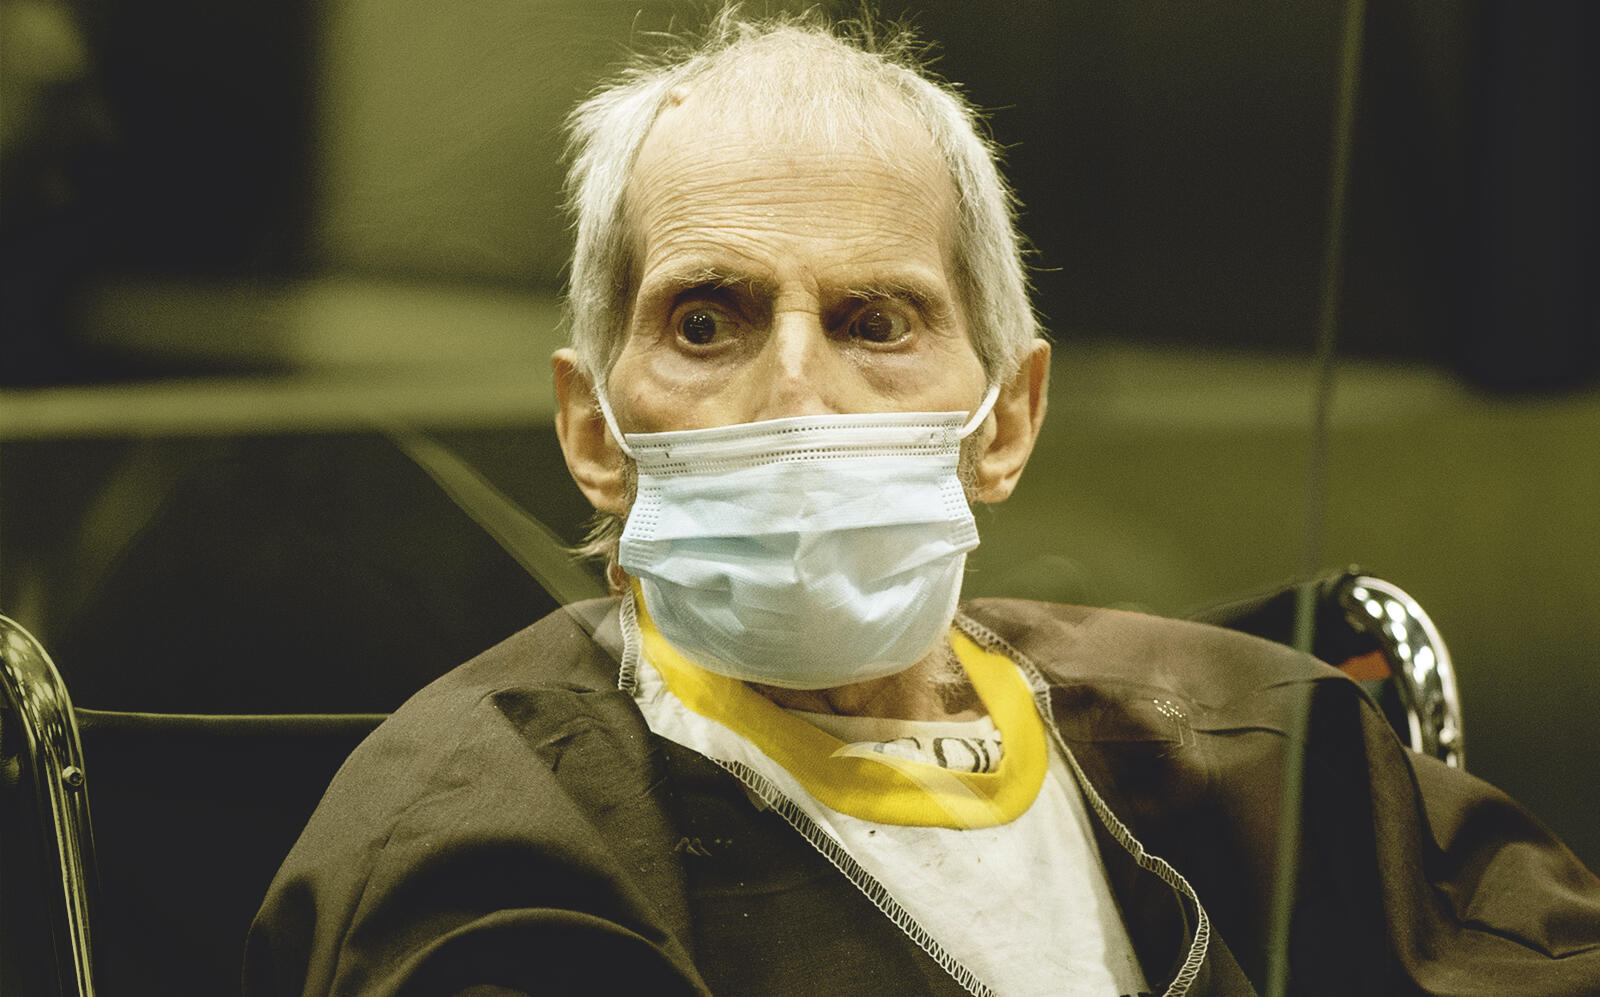 Robert Durst at the sentencing on October 14 (Getty)